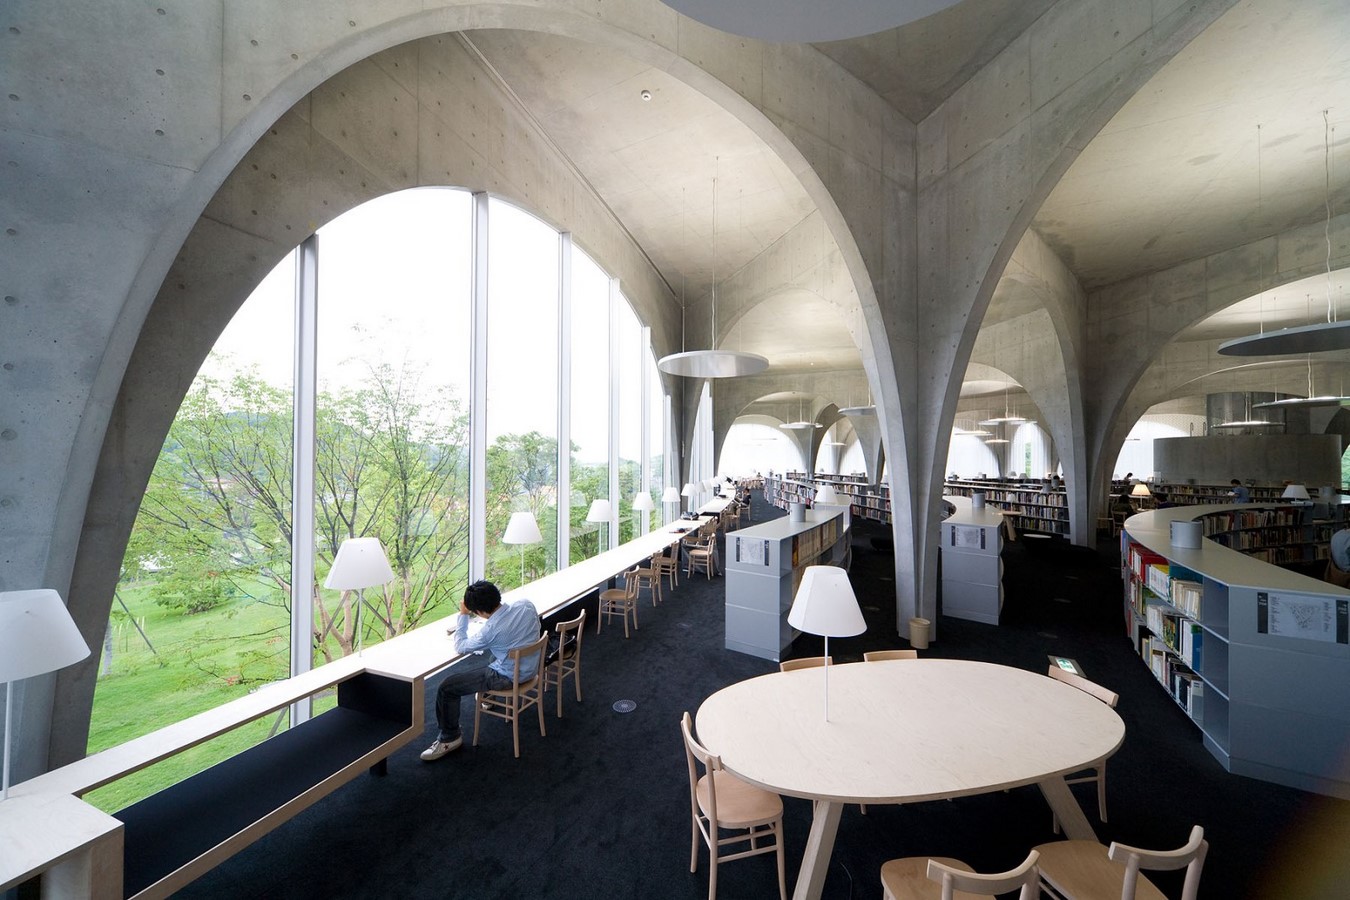 Tama Art Library by Toyo Ito: Library in Paradise - Sheet10